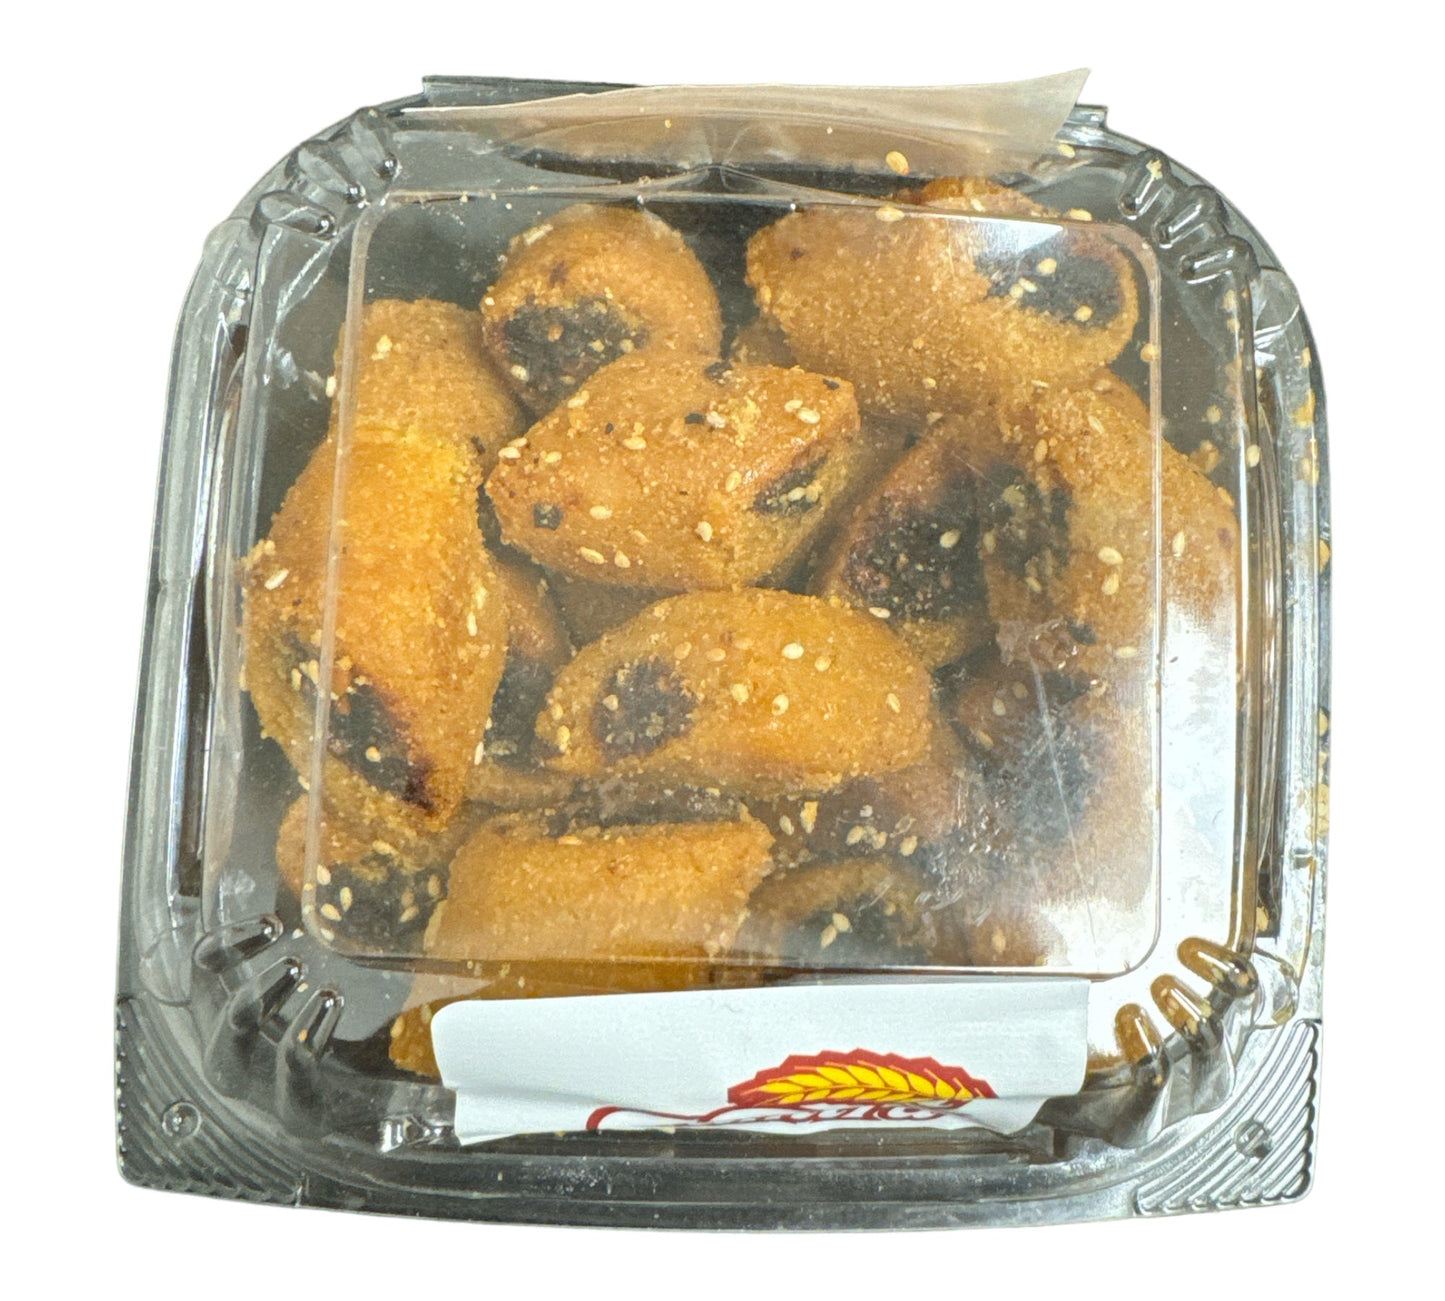 Makrout with Dates and Almond 500g